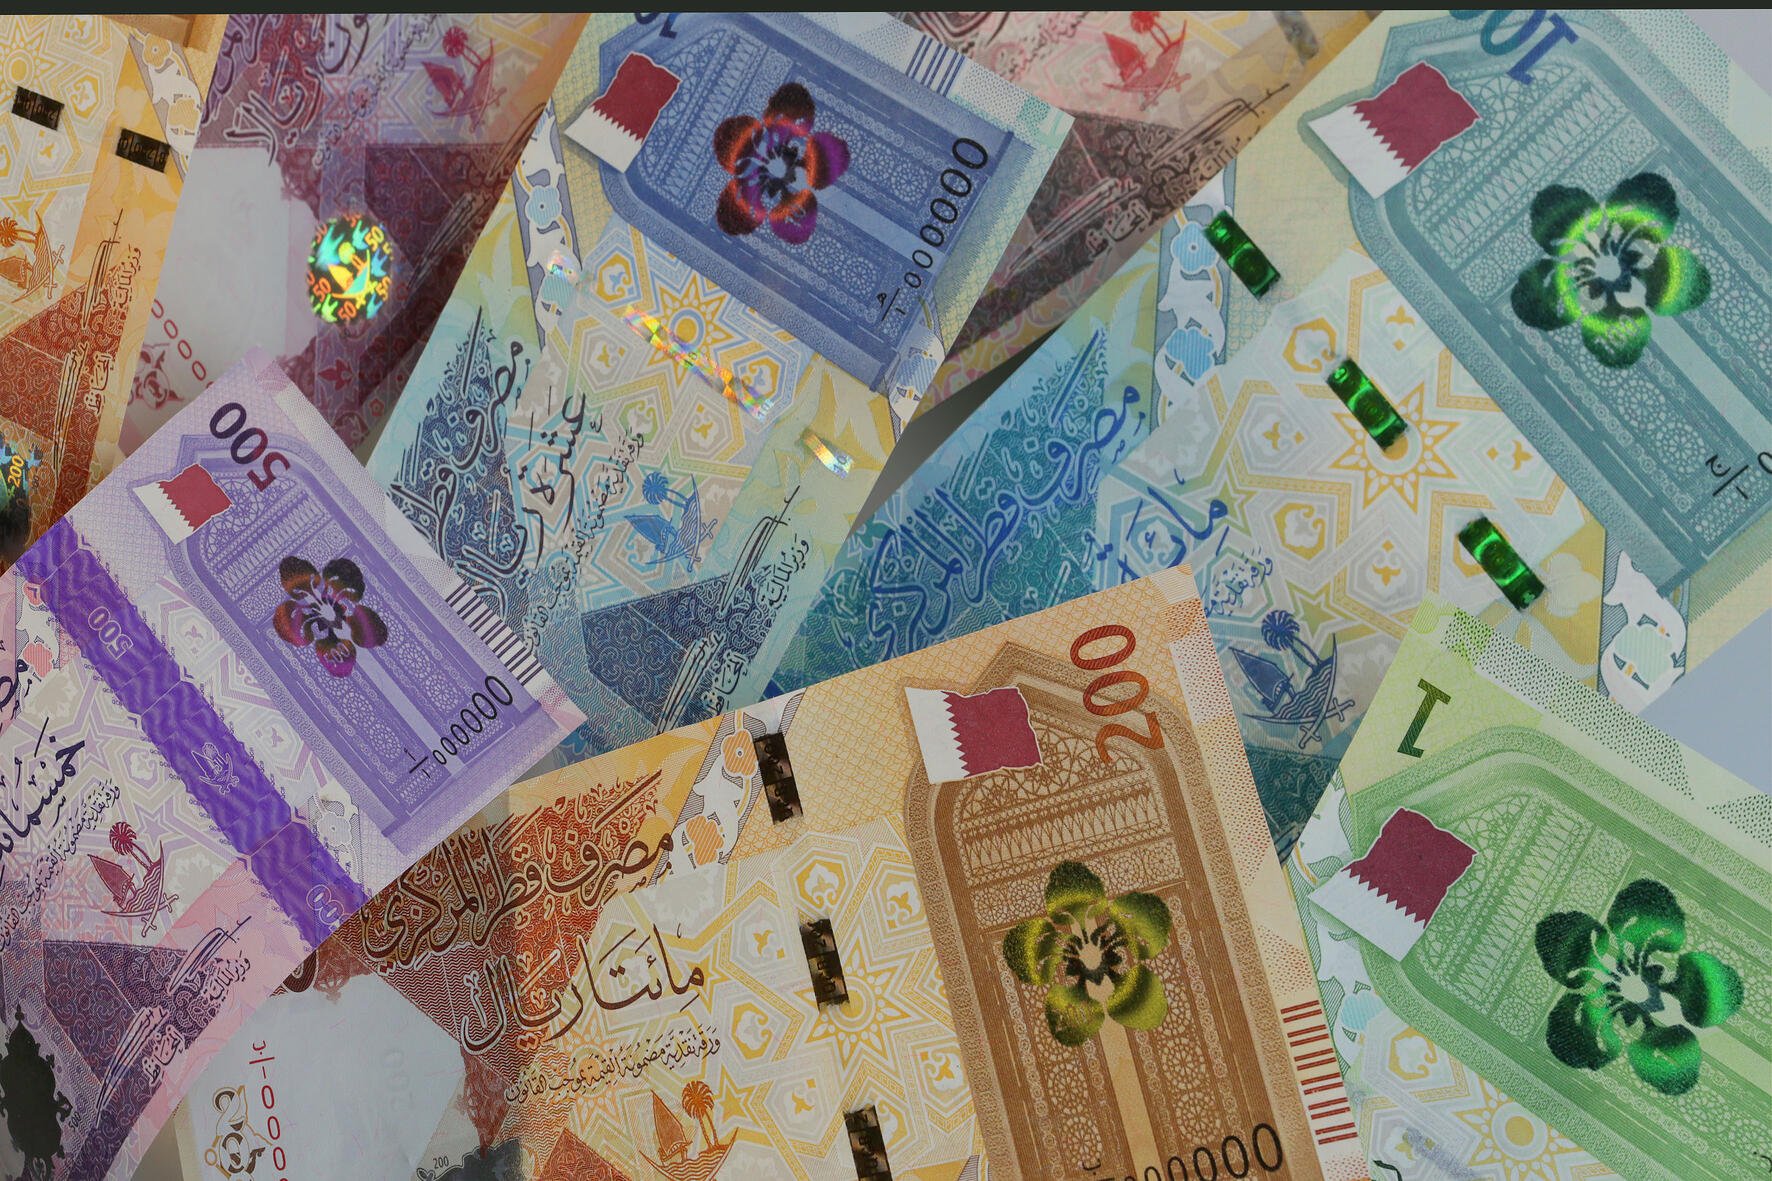 Qatar Announces New Series of Banknotes to Enter Circulation